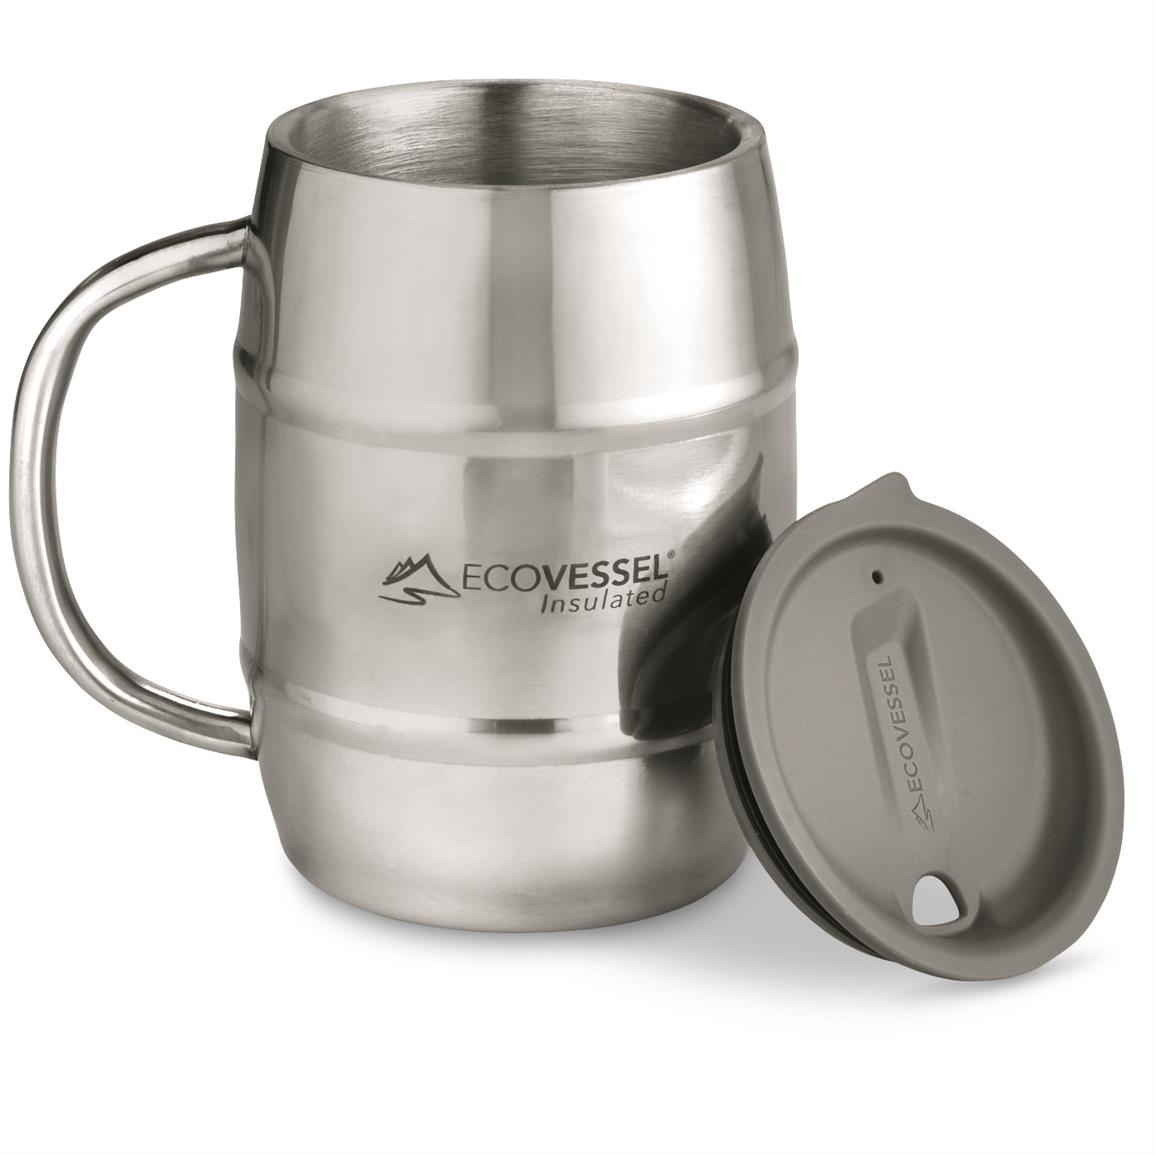 Ecovessel Double Barrel Insulated Stainless Steel Beer Coffee Mug With Lid 32 Oz 653081